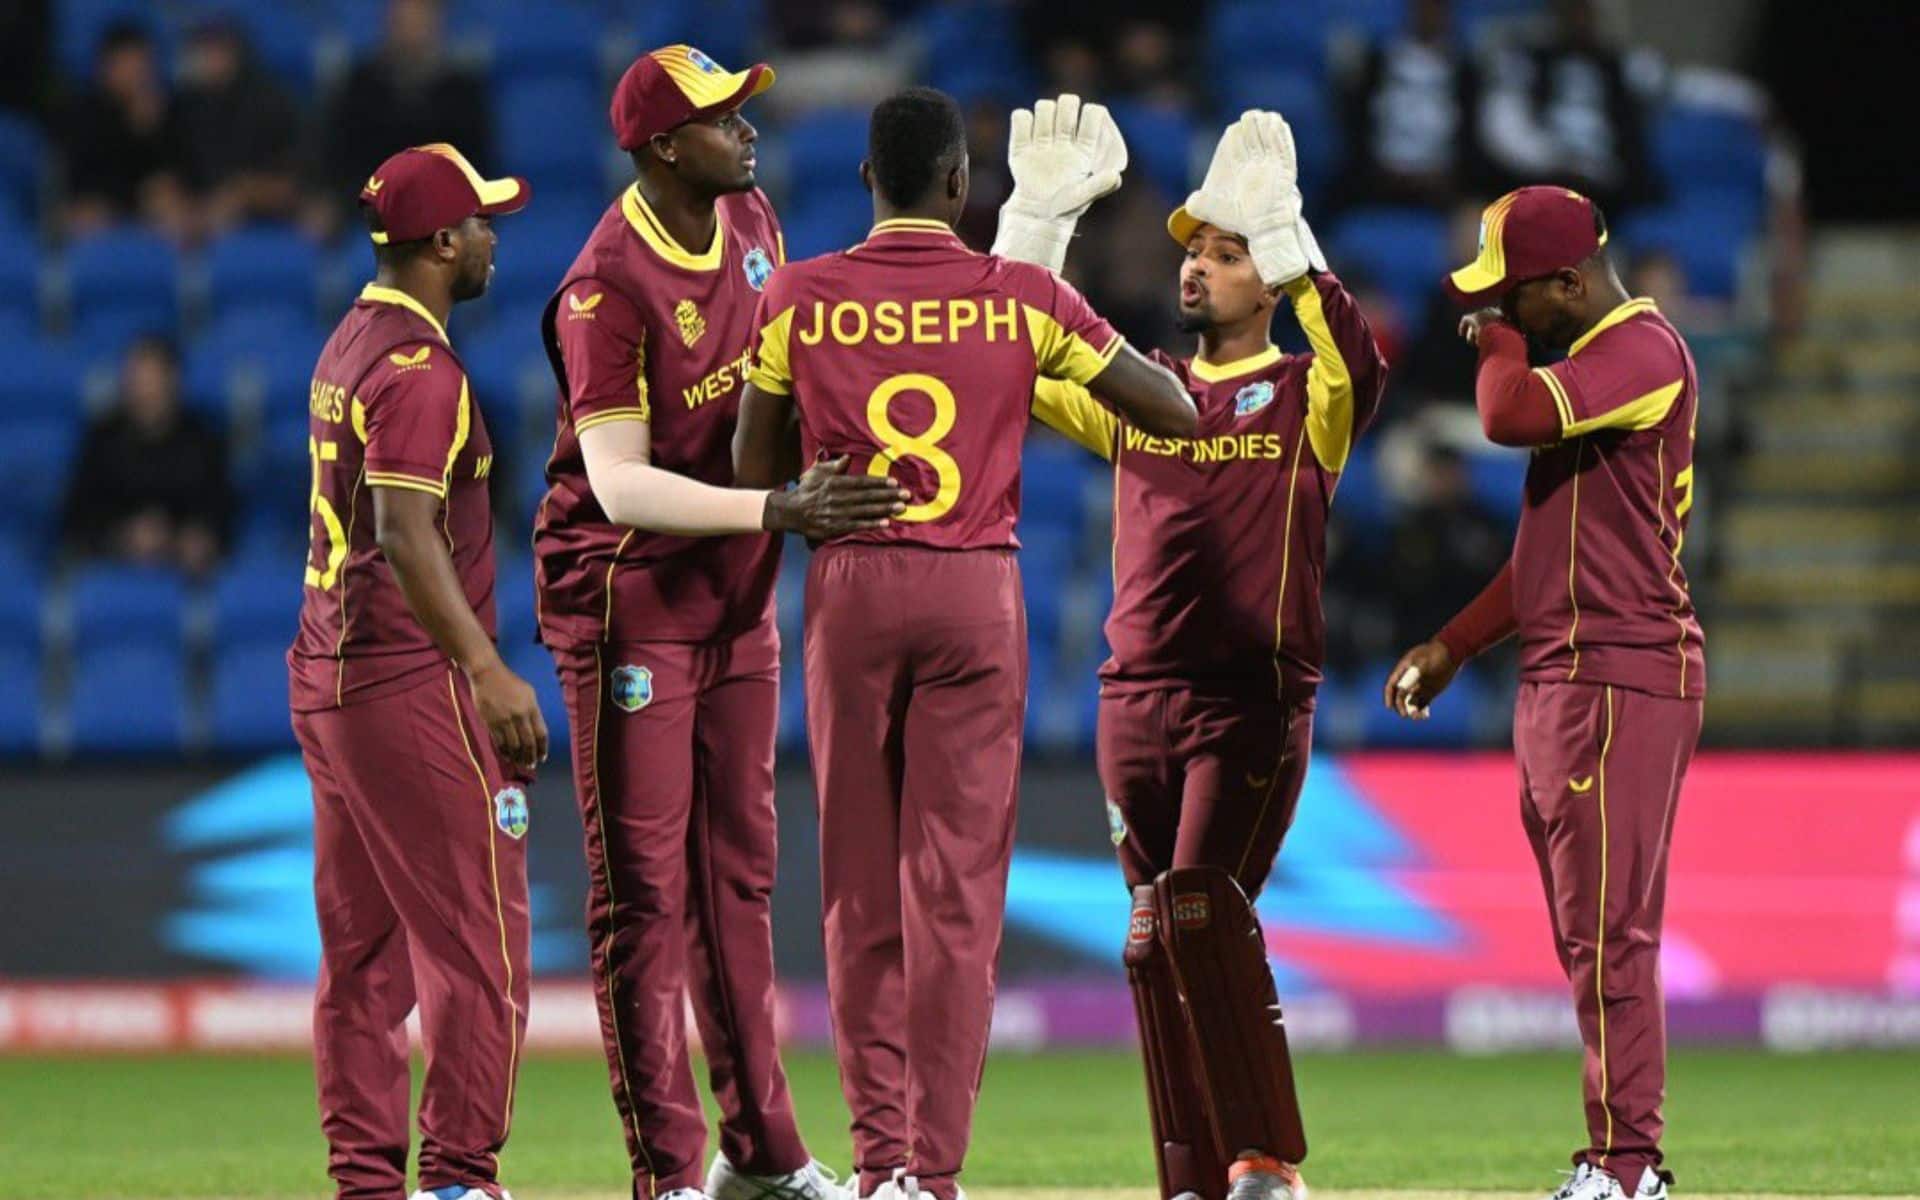 West Indies have been a force to be reckoned with in T20 cricket (x.com)